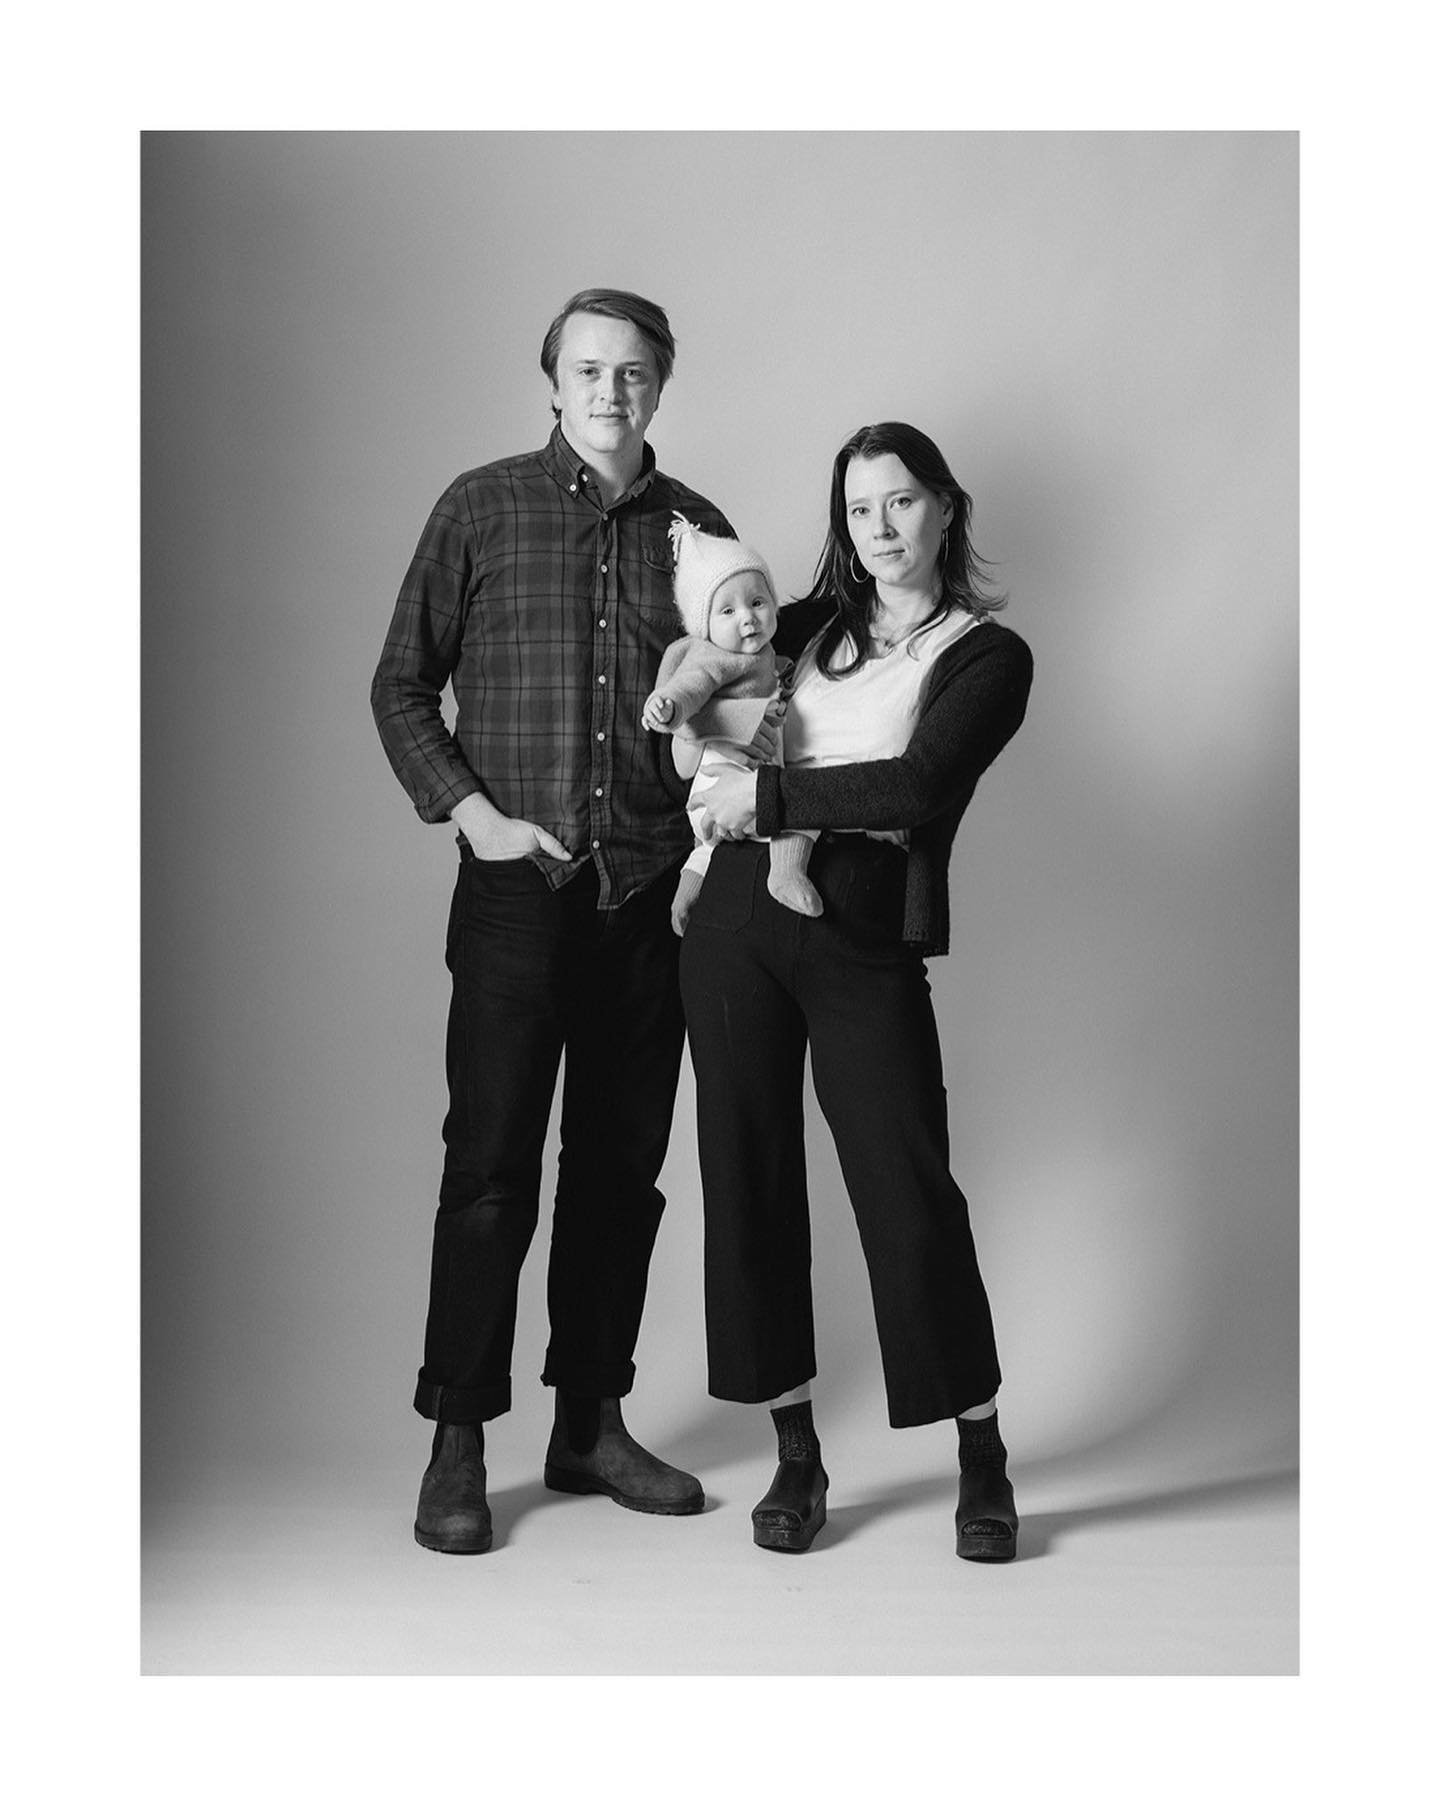 Spotlight on a local photographer and one of our favorite photo assistants, @mark_t_davis , who was recently in the studio capturing portraits of his beautiful family.